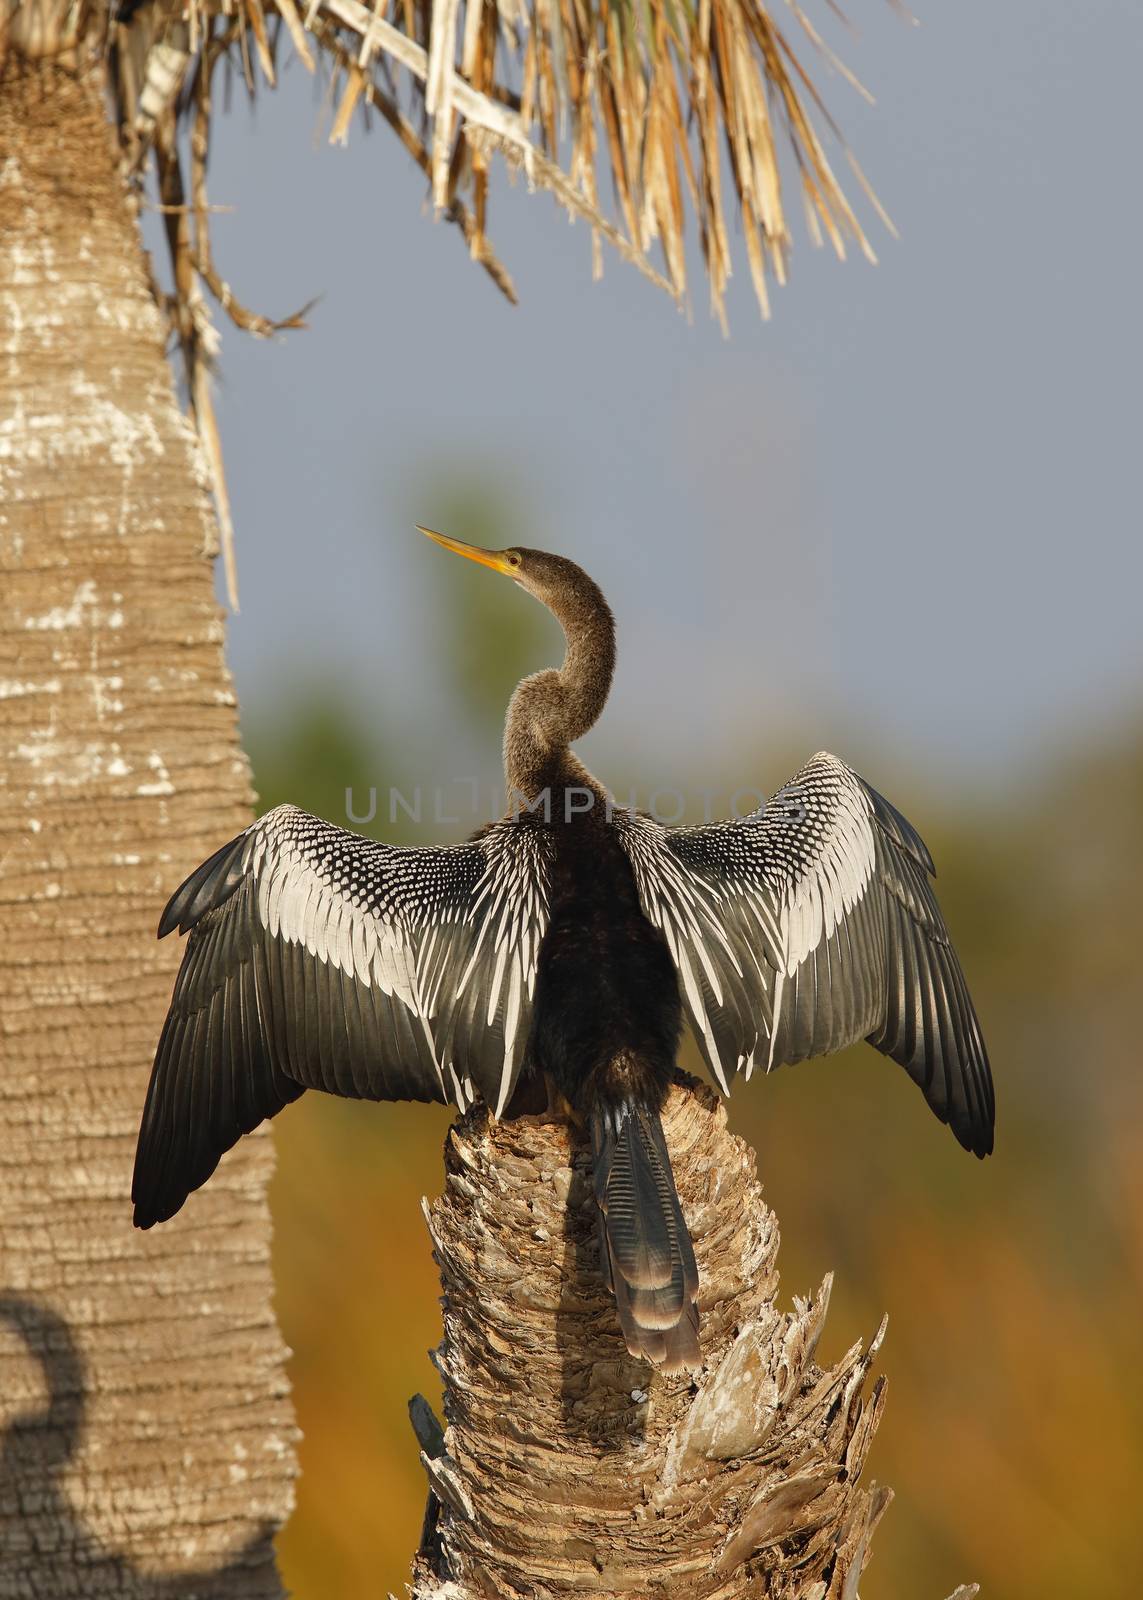 Anhinga stretching its wings to dry - Melbourne, Florida by gonepaddling